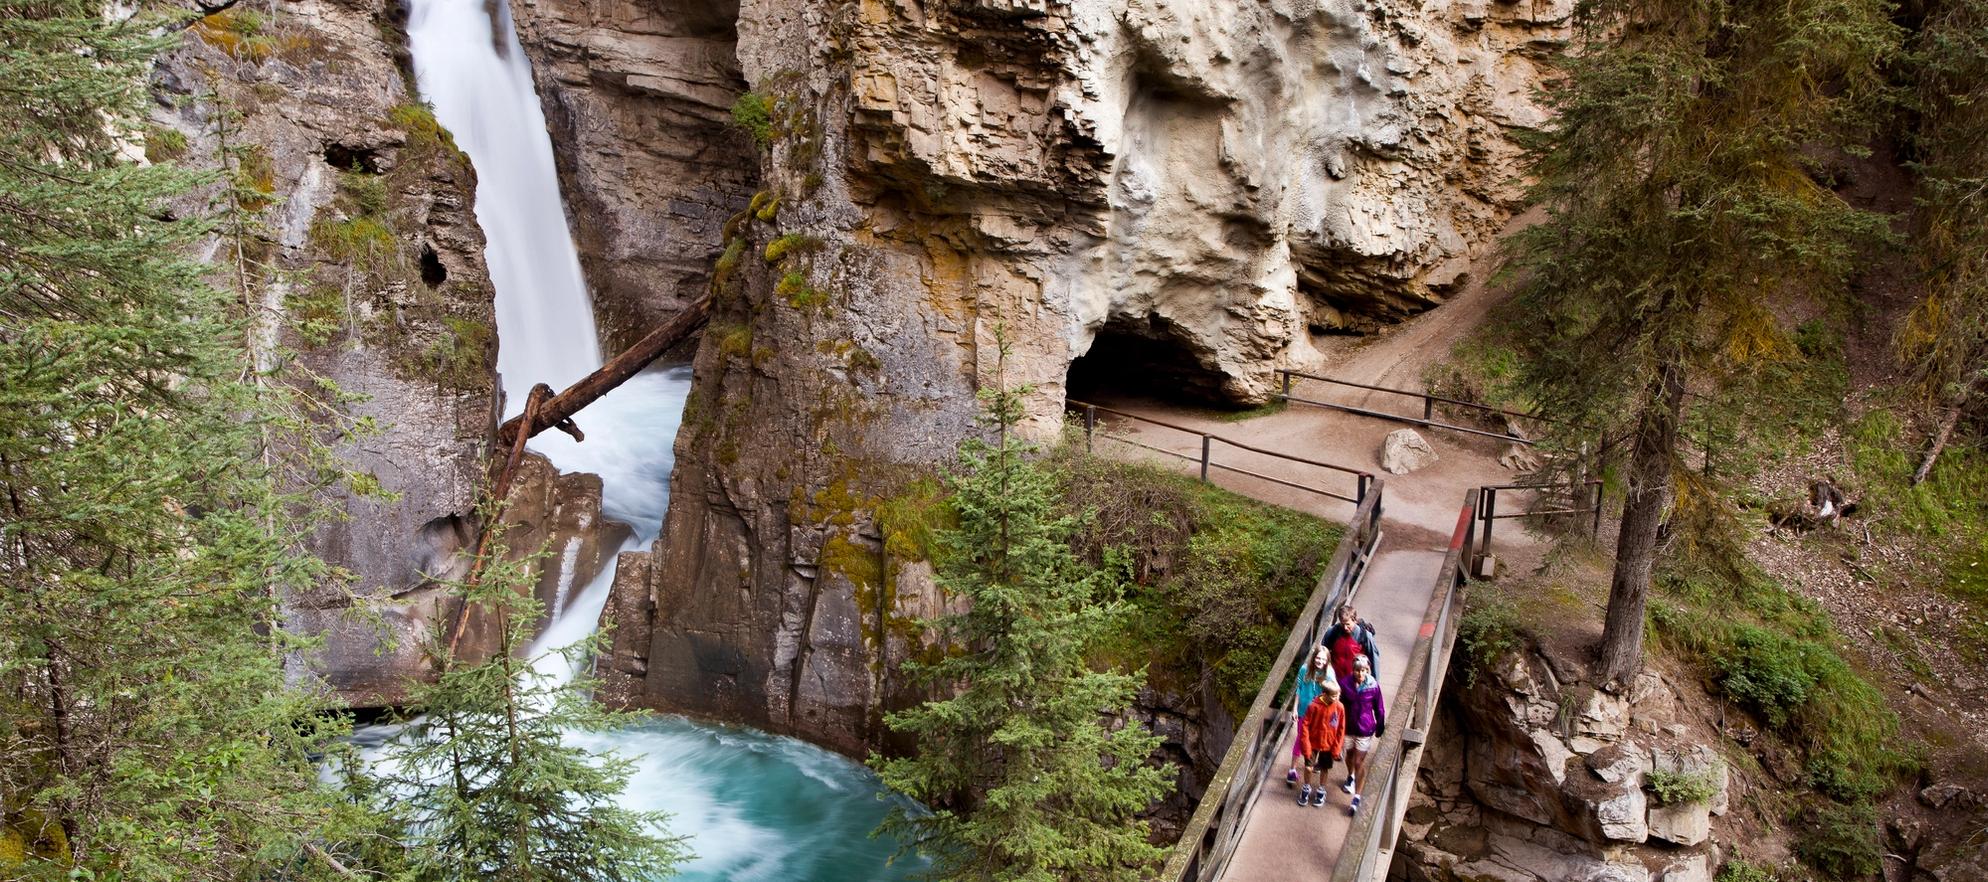 Hikers stand on a catwalk near the lower falls of Johnston's Canyon.